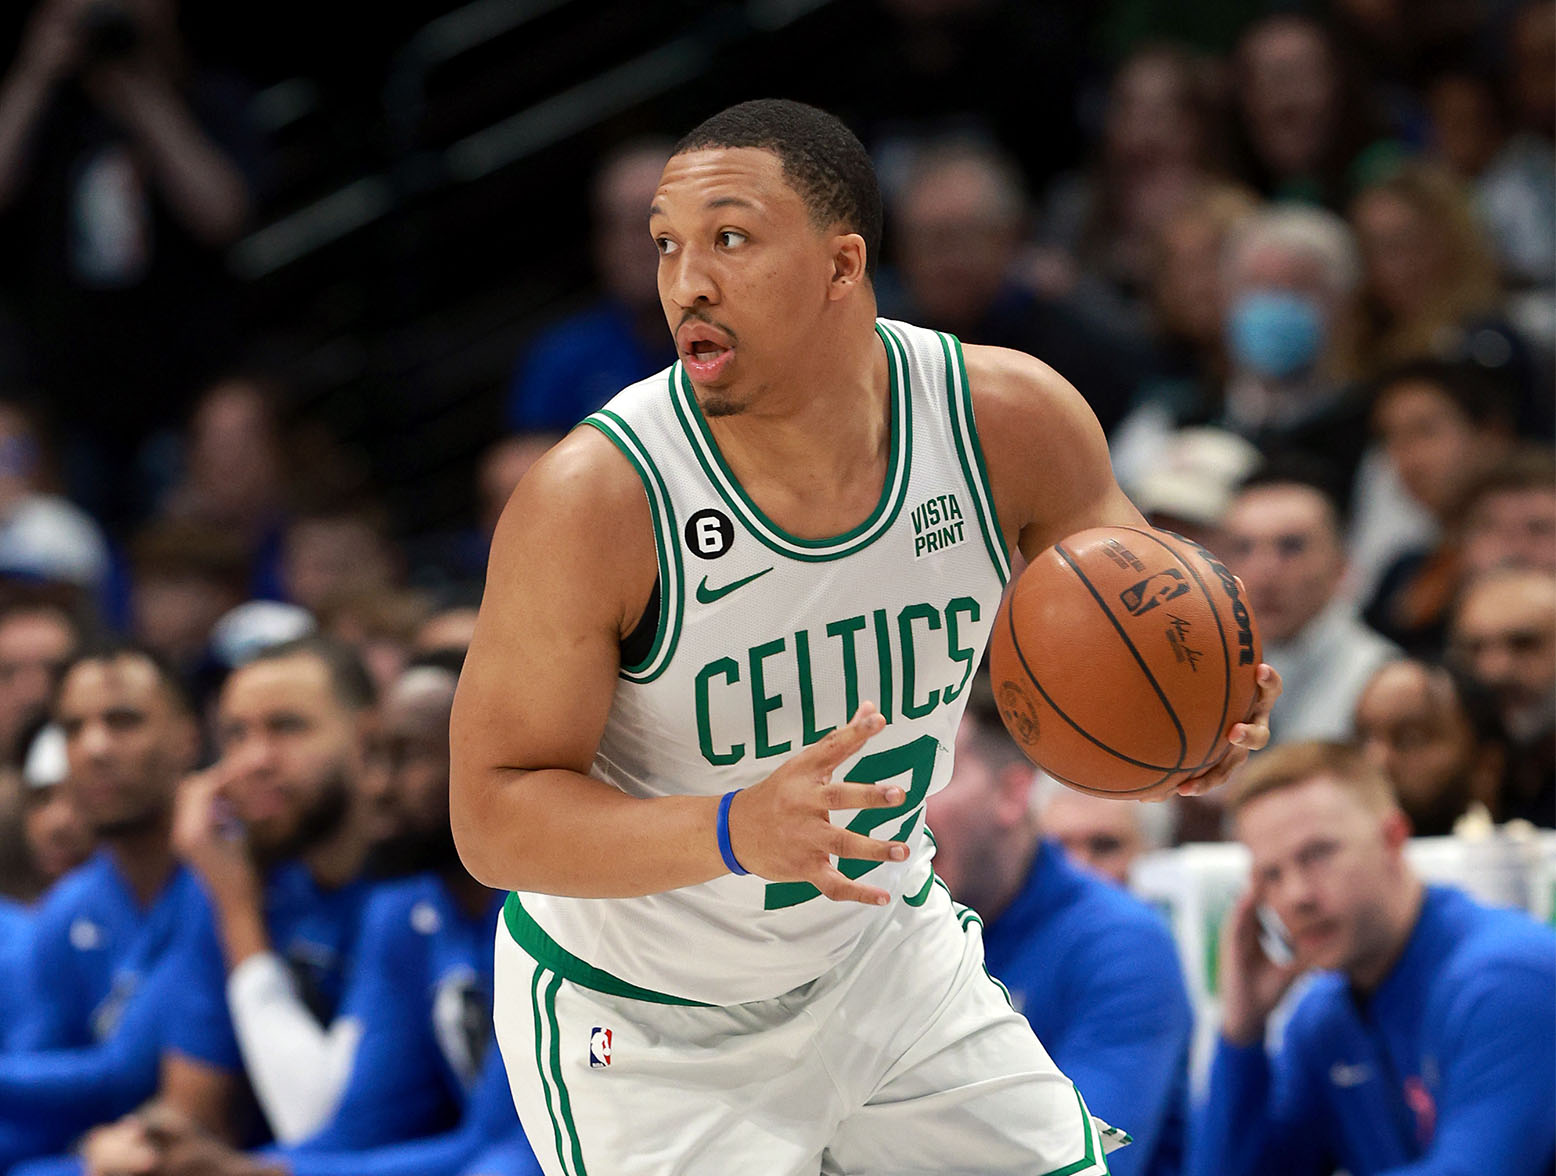 DALLAS, TEXAS - JANUARY 05: Grant Williams #12 of the Boston Celtics dribbles the ball down court against the Dallas Mavericks in the second half at American Airlines Center on January 05, 2023 in Dallas, Texas. NOTE TO USER: User expressly acknowledges and agrees that, by downloading and or using this photograph, User is consenting to the terms and conditions of the Getty Images License Agreement. (Photo by Tom Pennington/Getty Images)